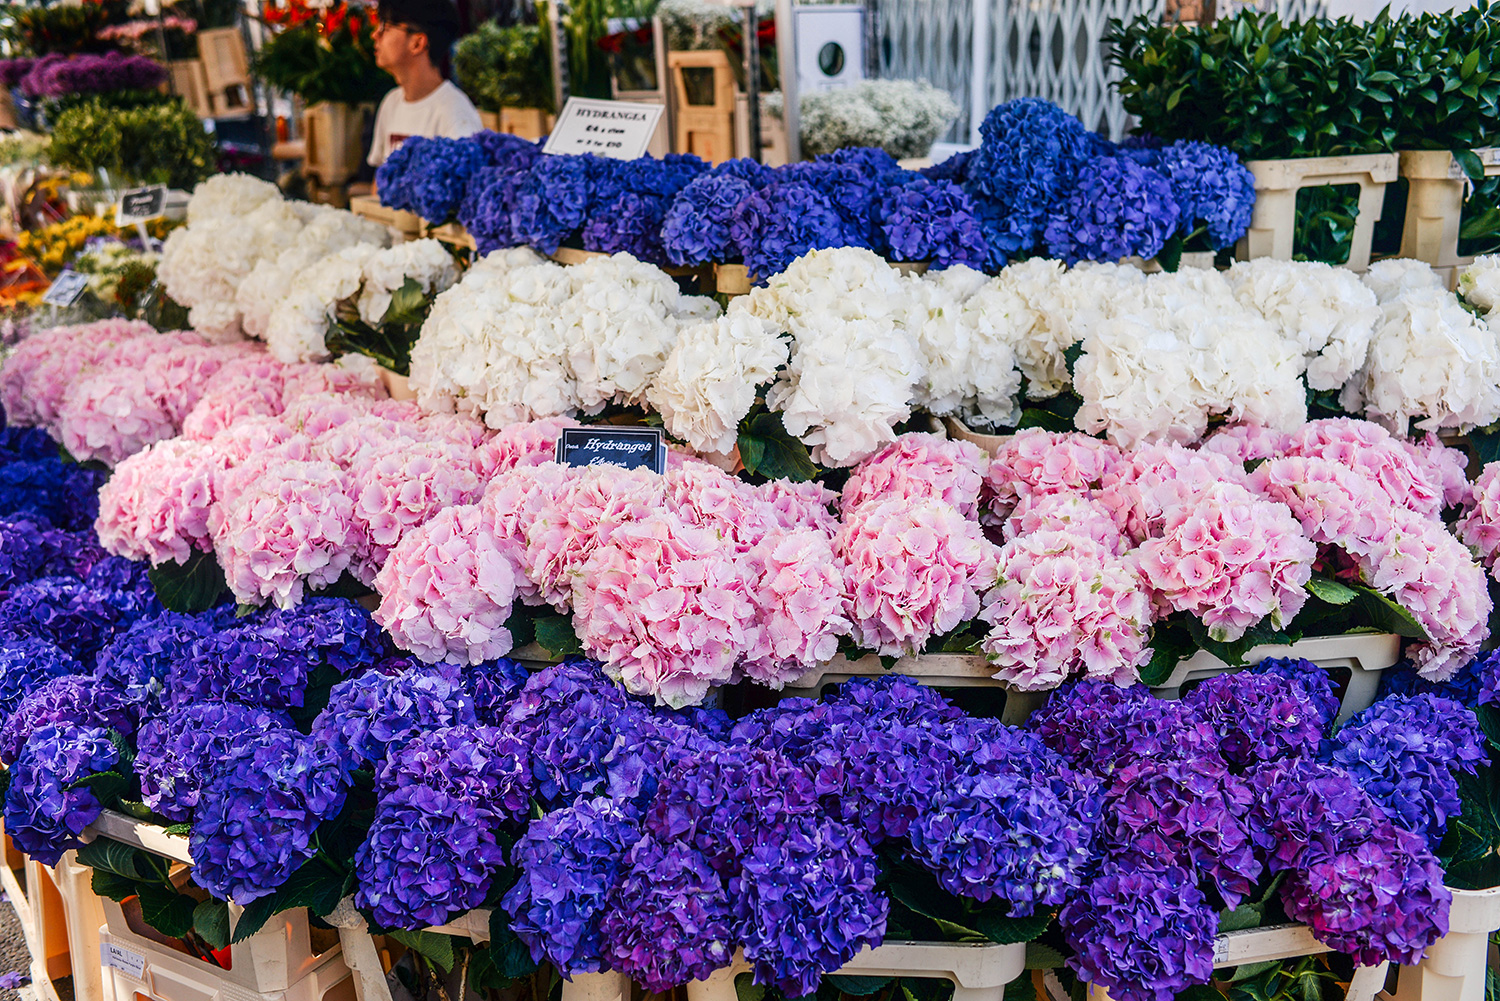 Columbia Road Flower Market | The Style Scribe